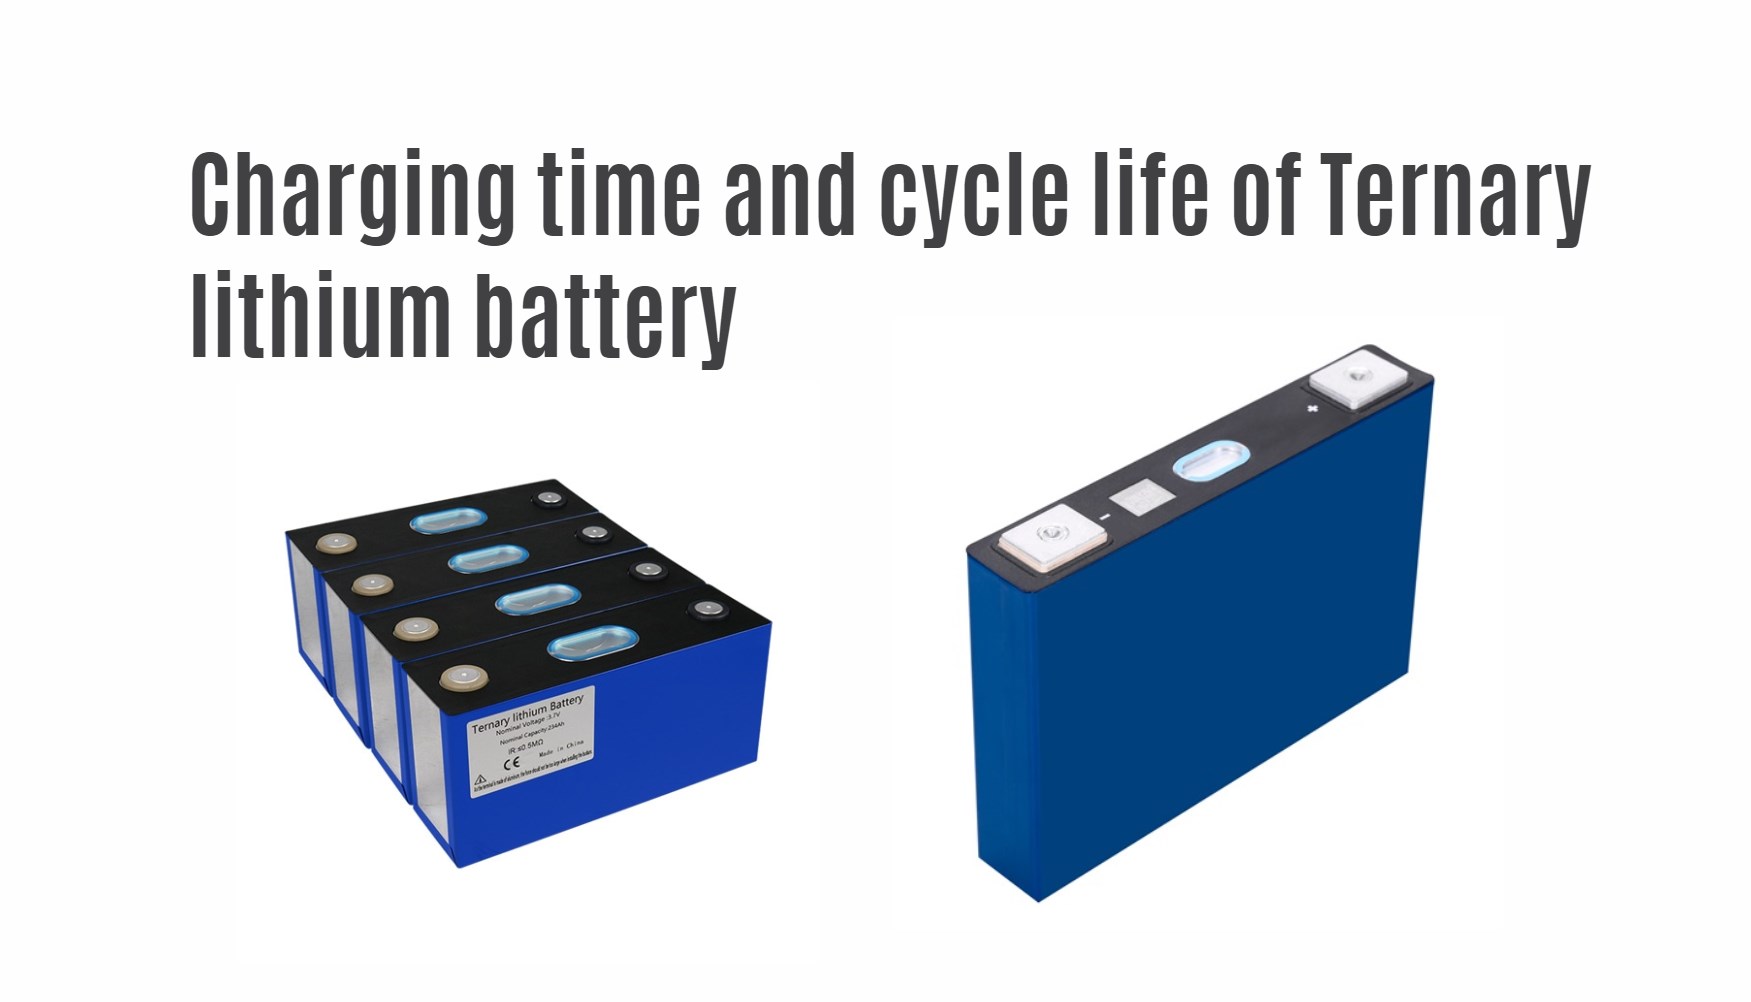 Charging time and cycle life of Ternary lithium battery